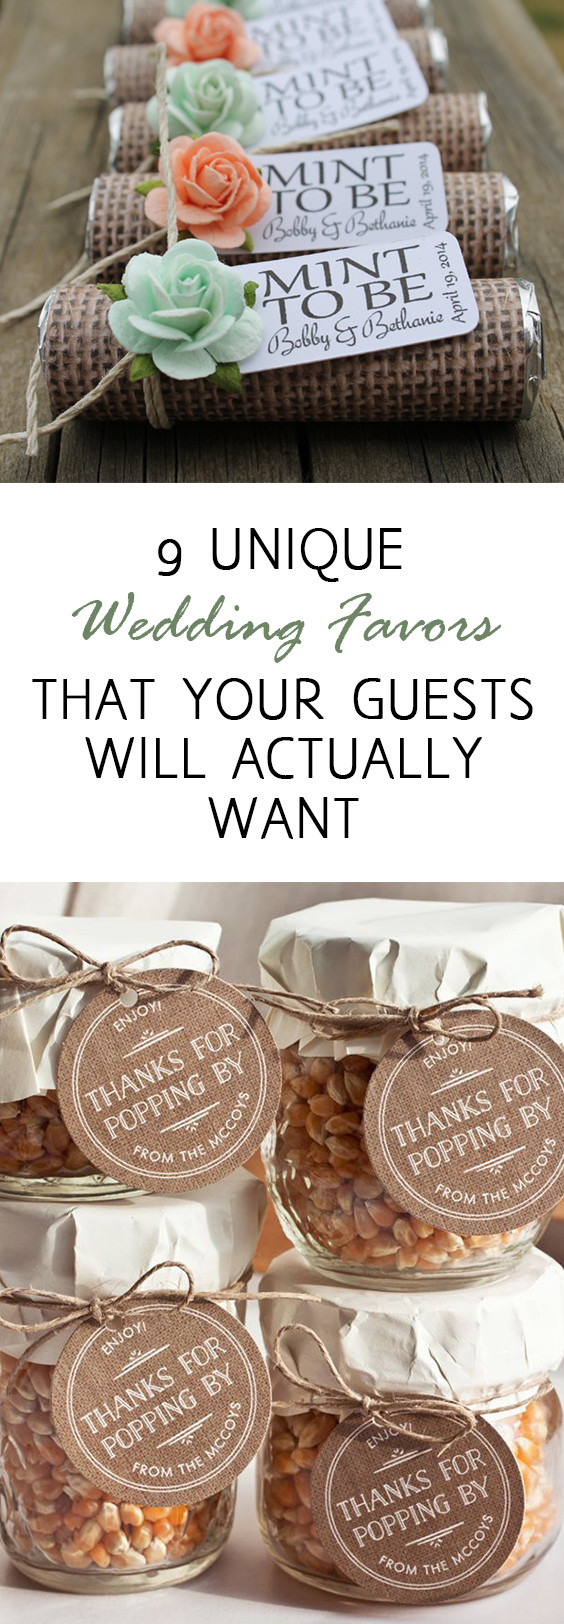 Cheap Wedding Favors
 9 Unique Wedding Favors that Your Guests Will Actually